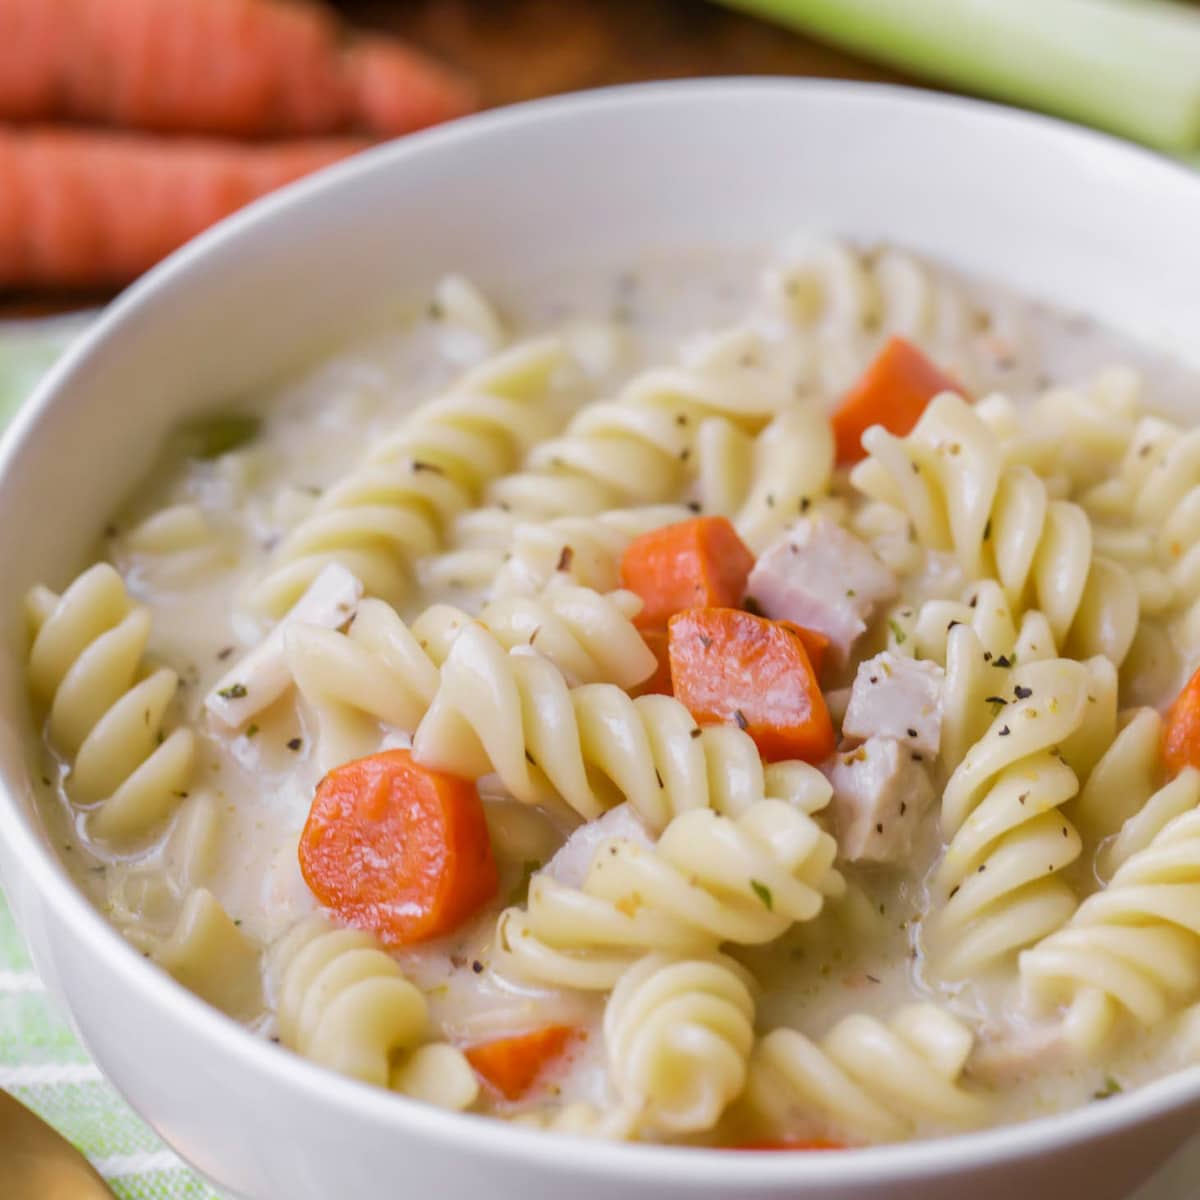 Family Dinner Ideas - Turkey noodle soup with rotini and carrots.